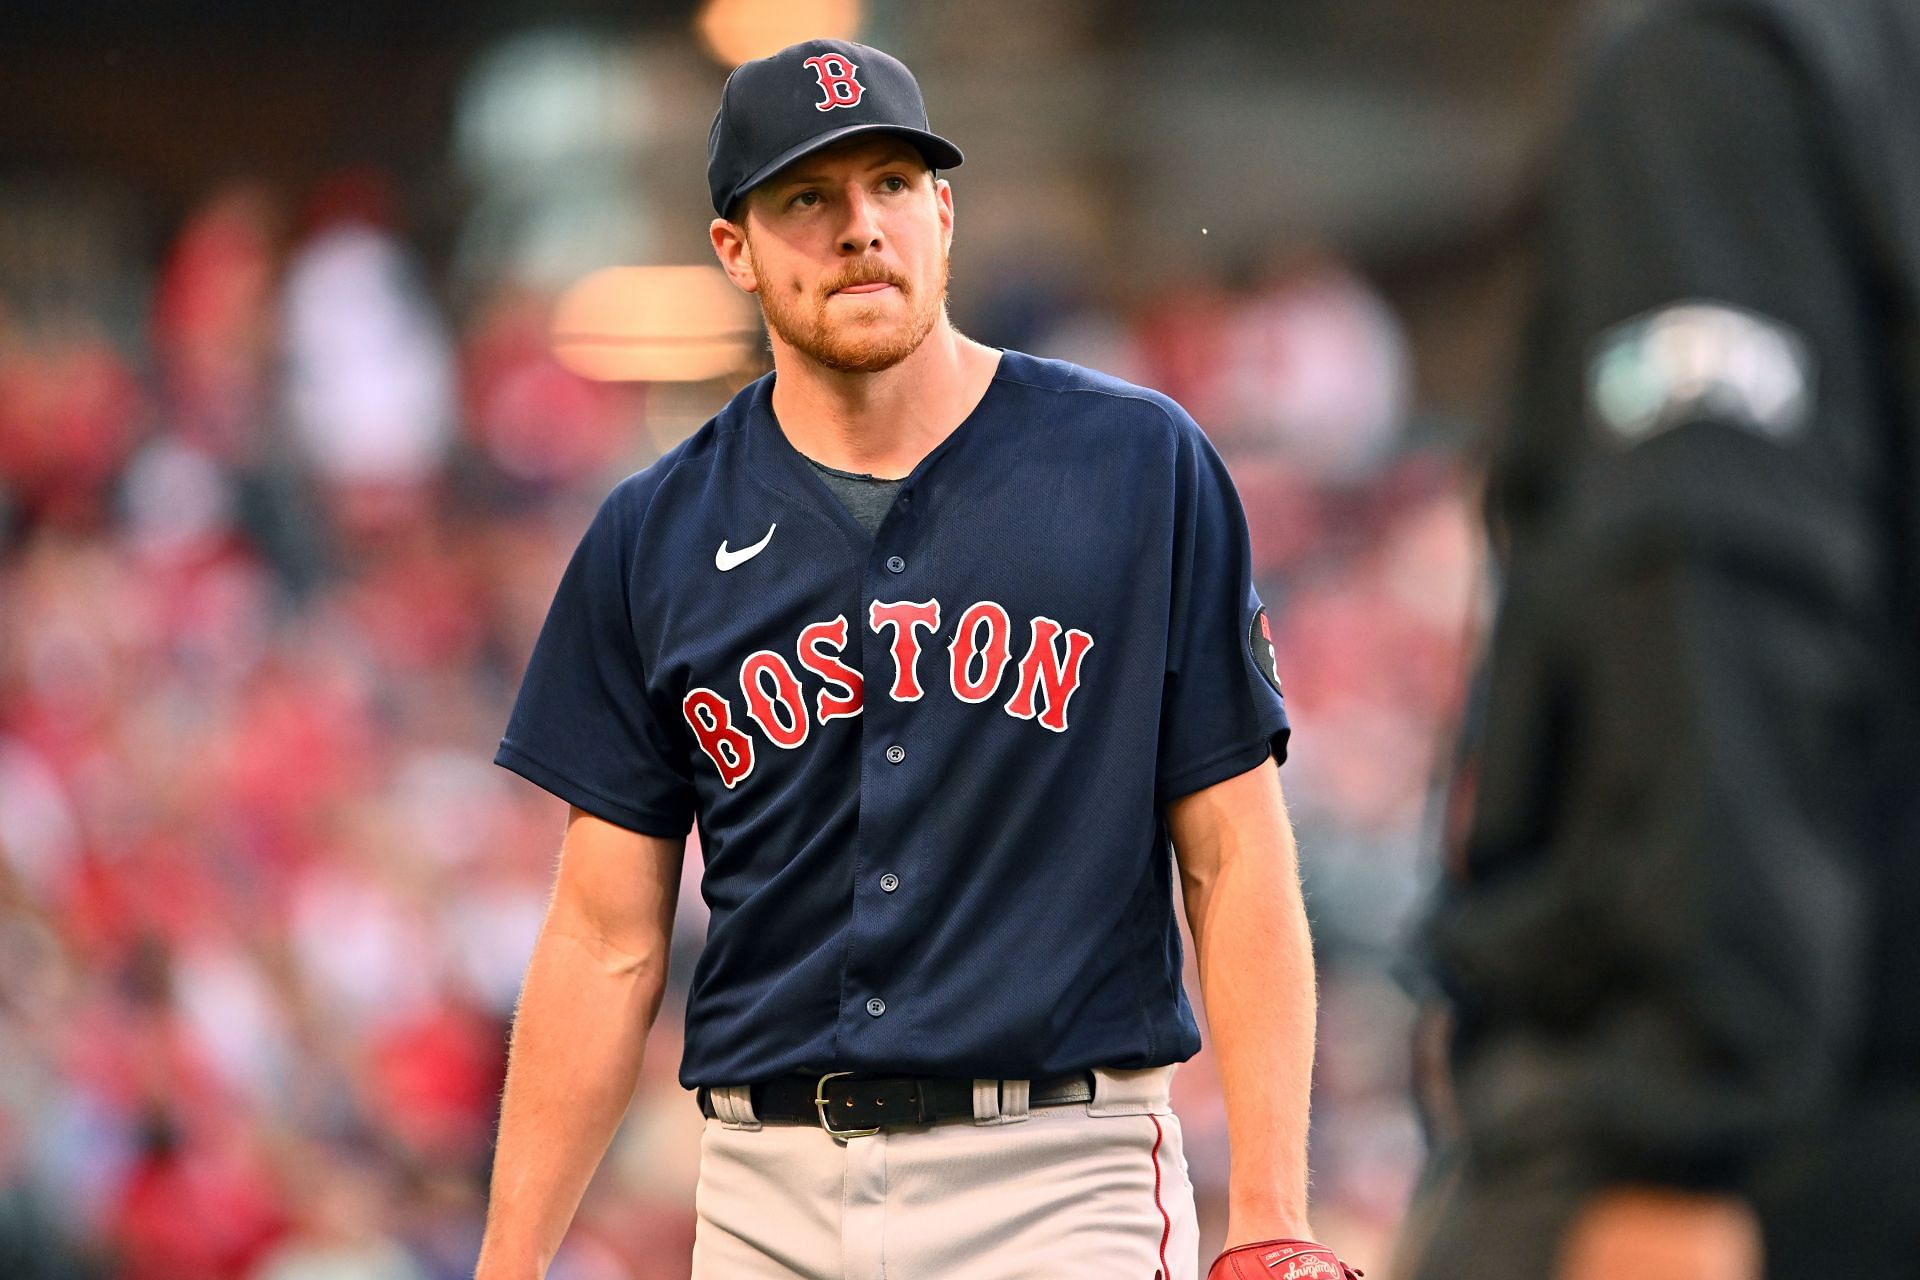 Yankees: Red Sox starter Nick Pivetta puts foot in mouth after NYY sweep